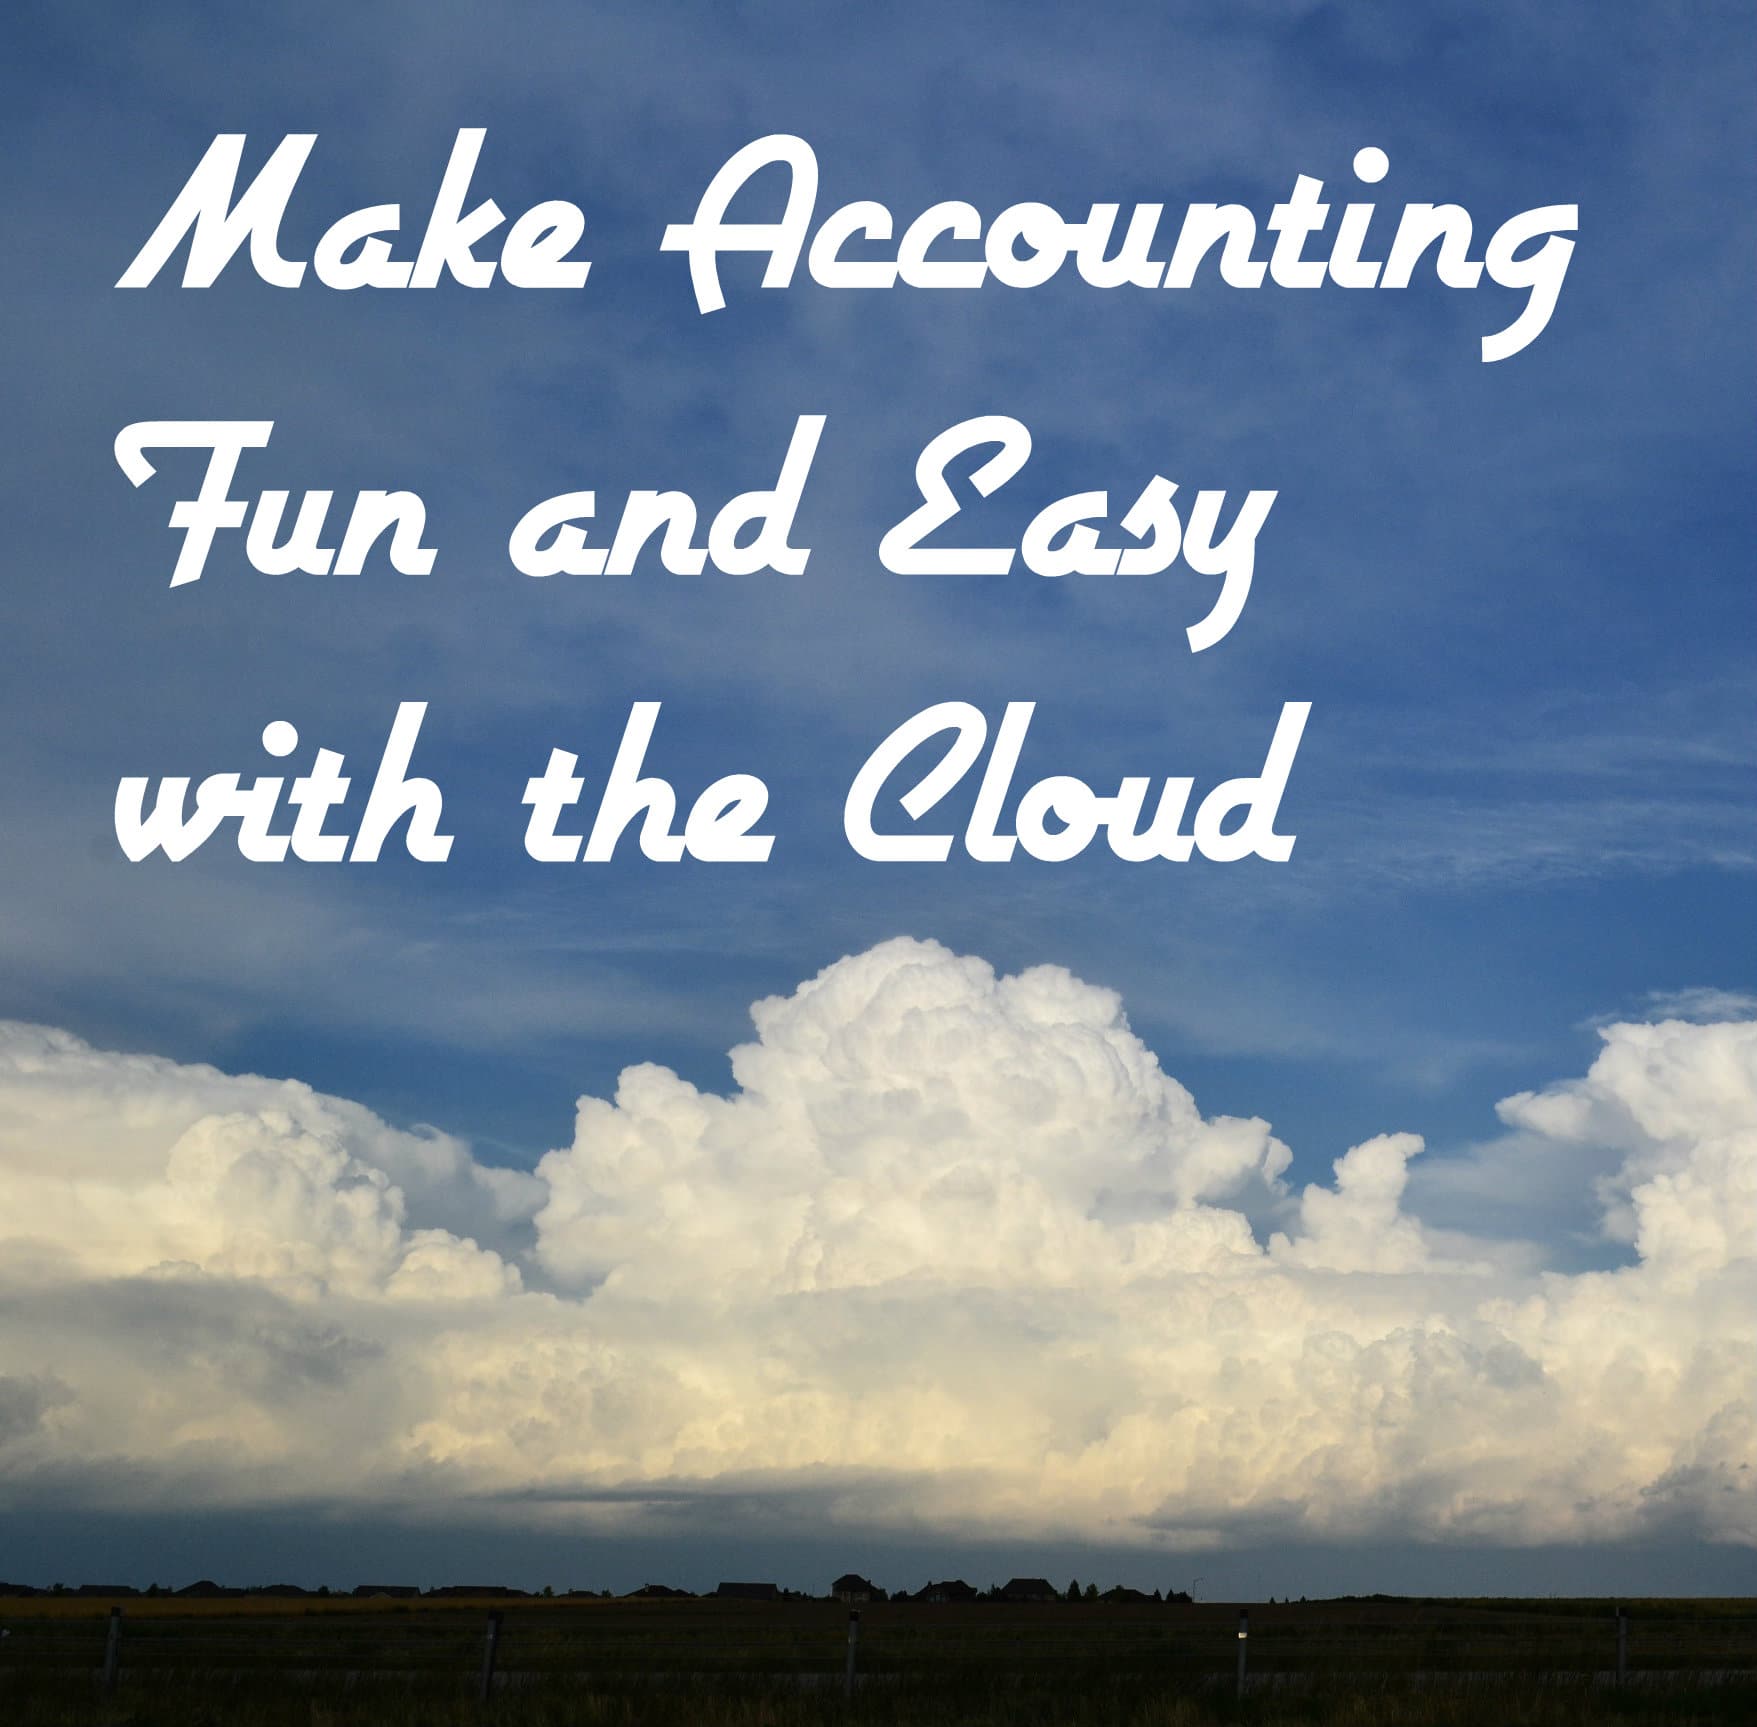 Make Accounting Fun and Easy with the Cloud